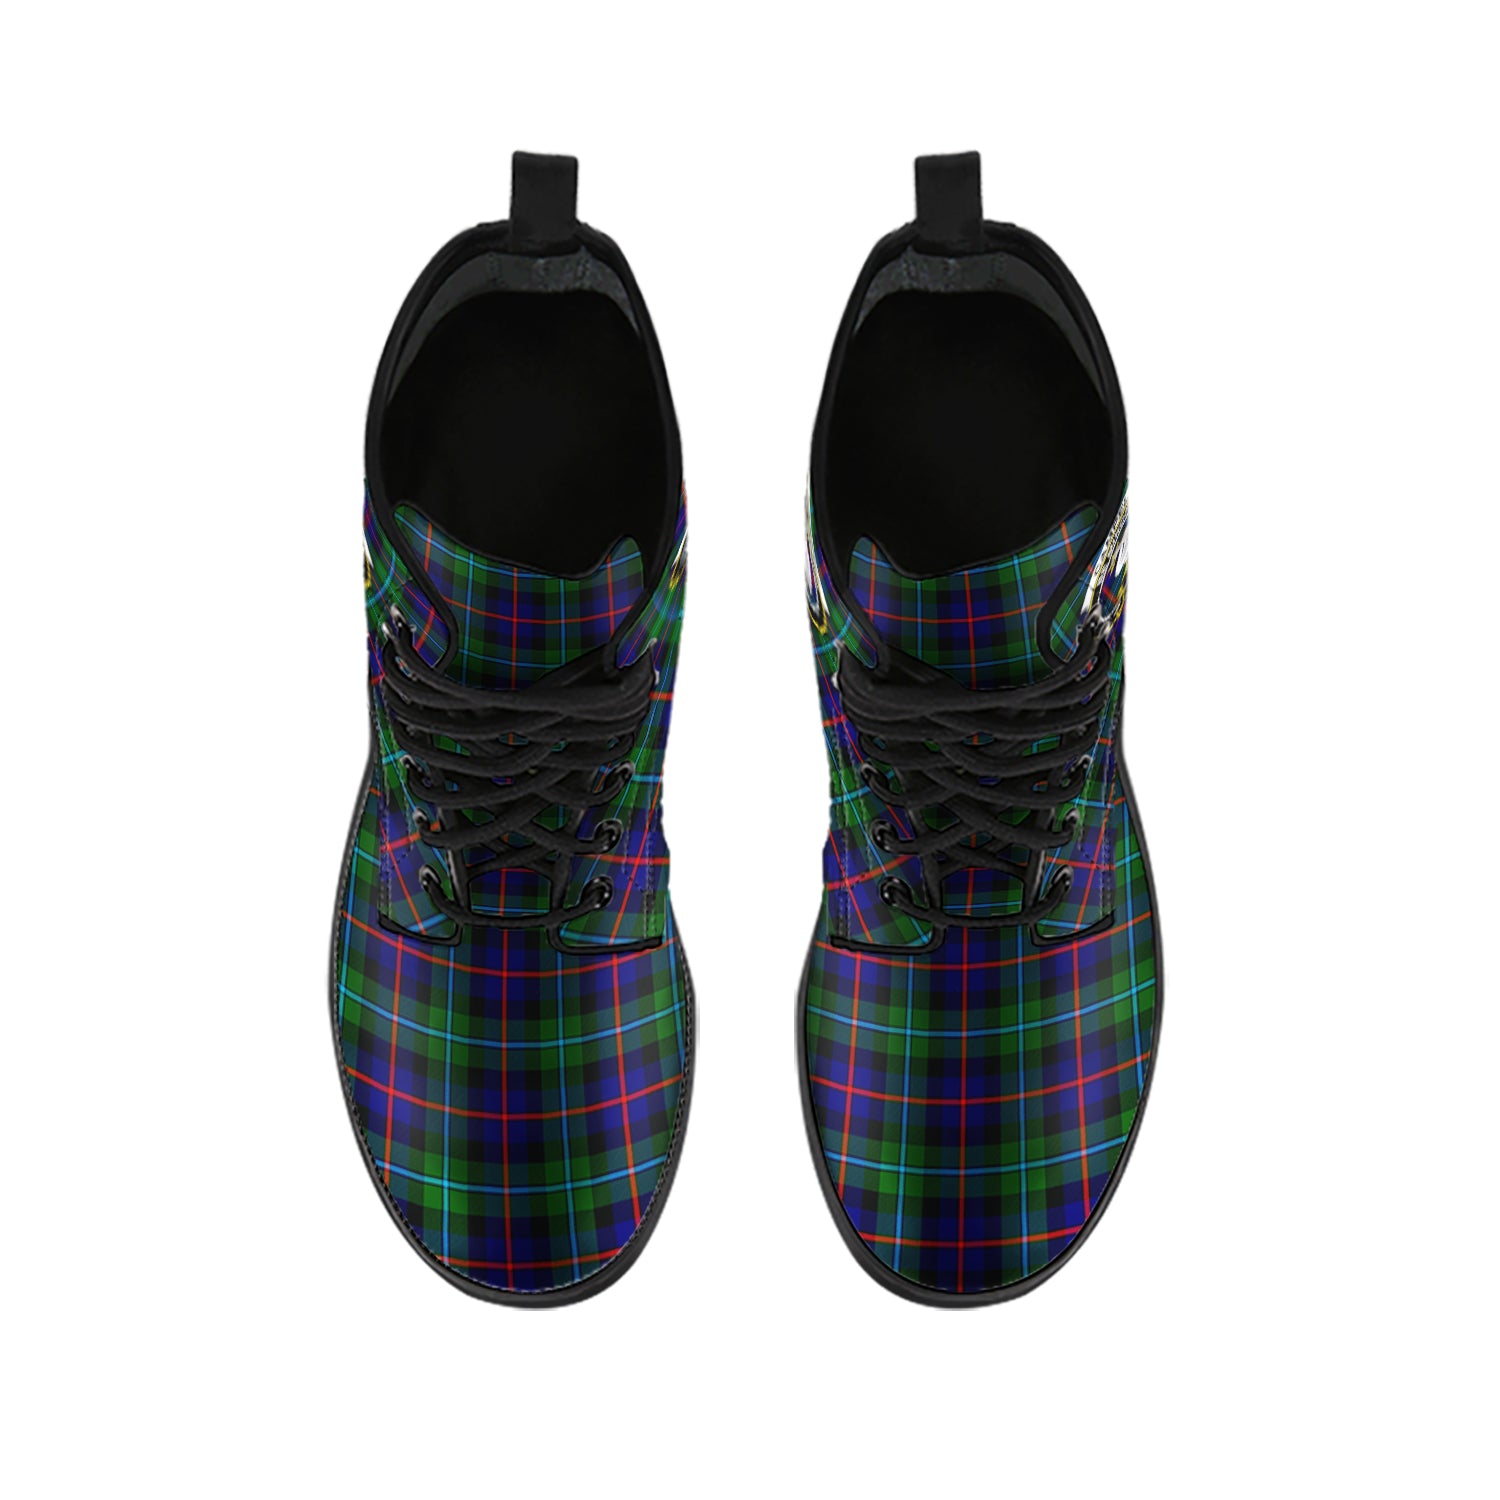 campbell-of-cawdor-modern-tartan-leather-boots-with-family-crest